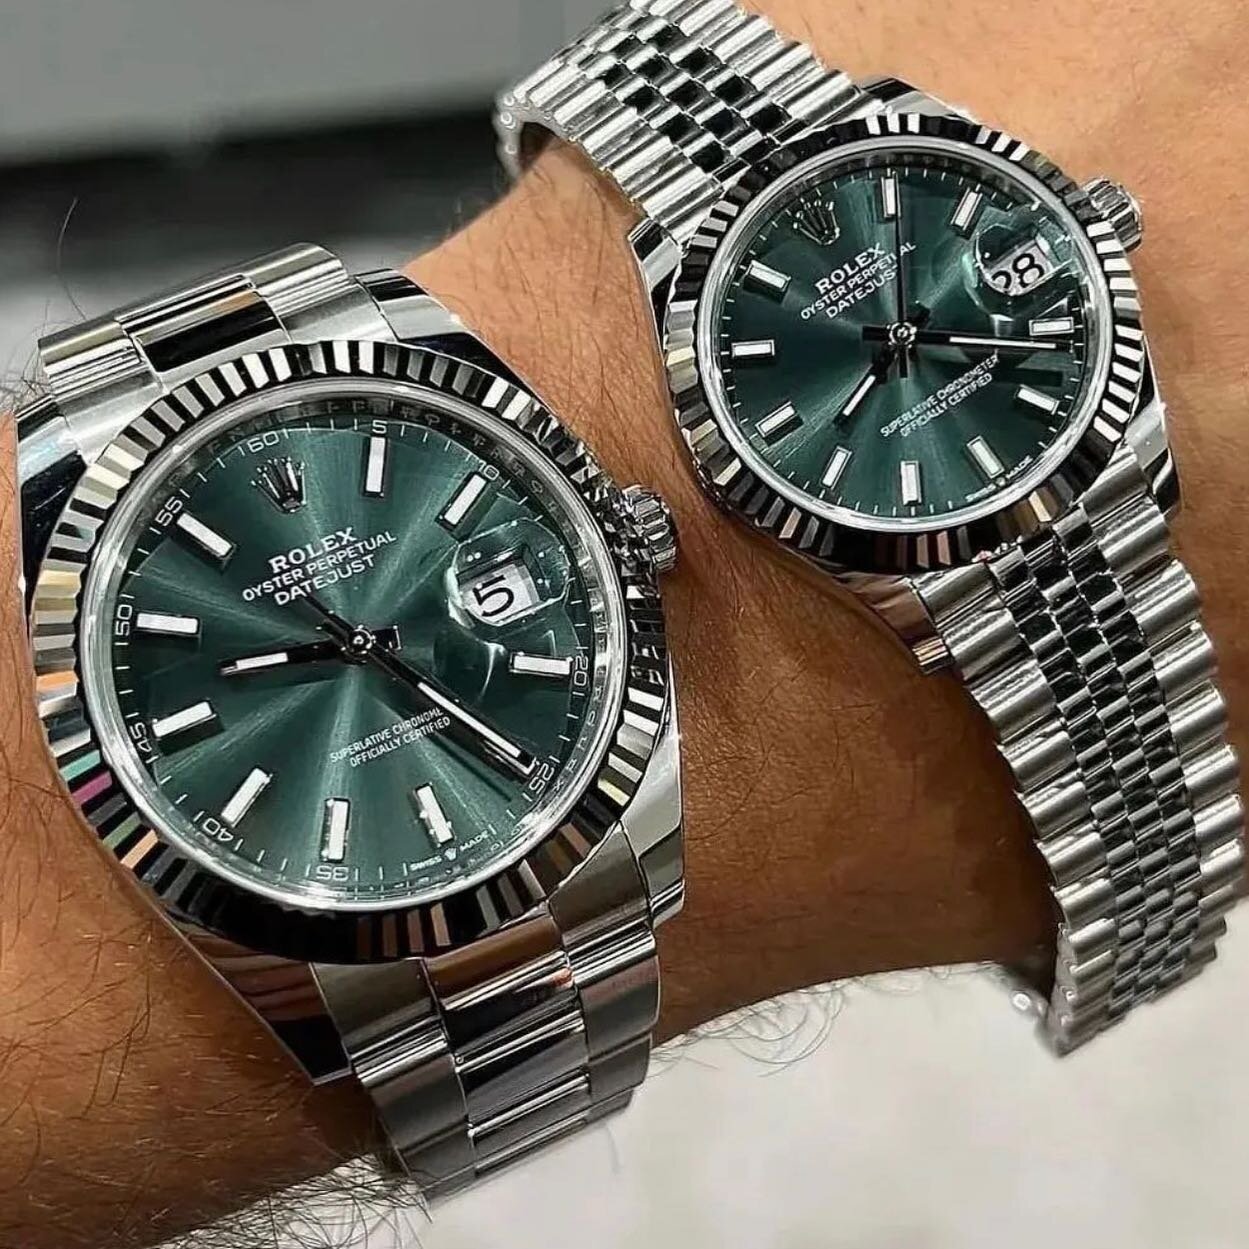 His and her DateJust with mint green dials. Contact us if you&rsquo;re looking for these or something similar and we&rsquo;ll help source your next timepiece! #rolex #datejust